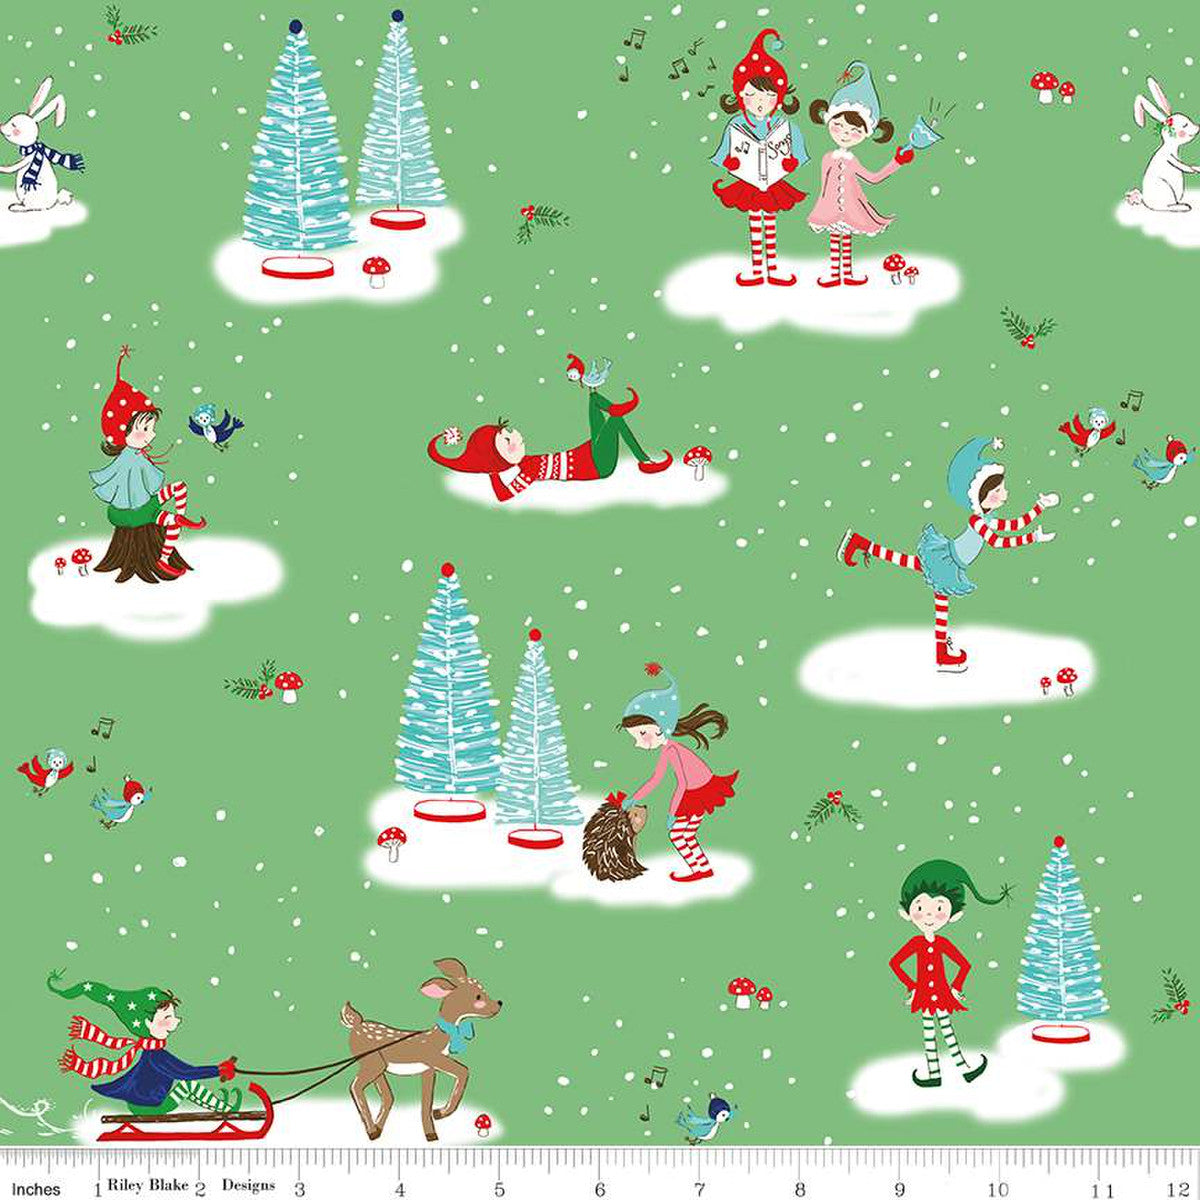 Manufacturer: Riley Blake Designs Designer: Tasha Noel Collection: Pixie Noel 2 Print Name: Main in Green Material: 100% Cotton  Weight: Quilting  SKU: C12110-GREEN Width: 44 inches